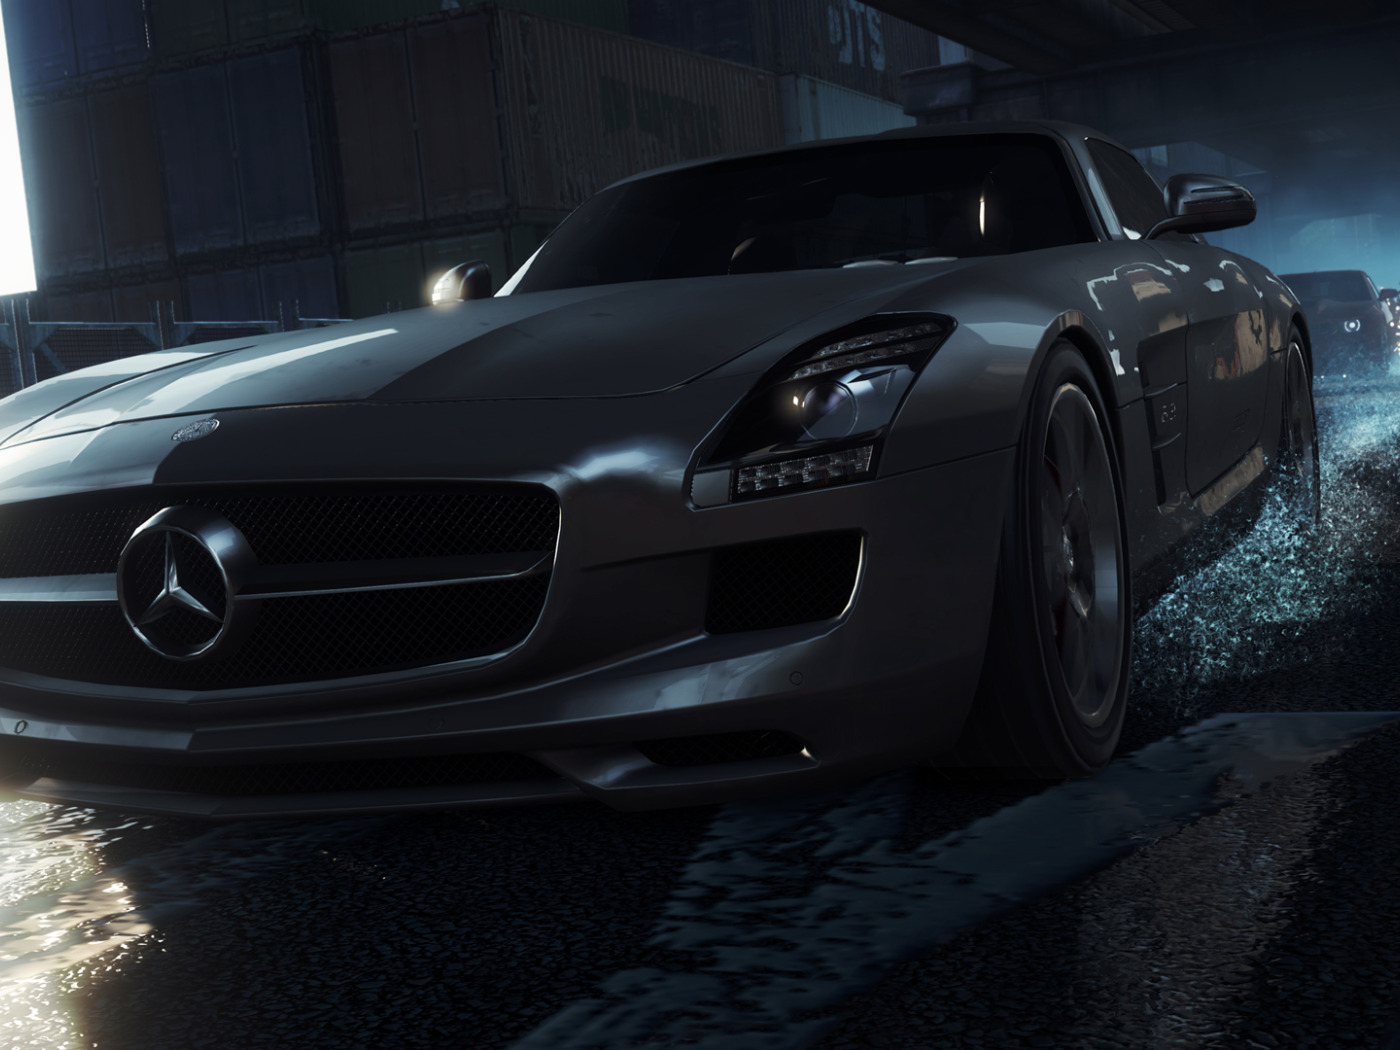 Need for Speed most wanted 2012. Mercedes Benz NFS most wanted 2012. Нфс most wanted 2012. Mercedes SL 65 most wanted 2012. Игры гонки недфорспид